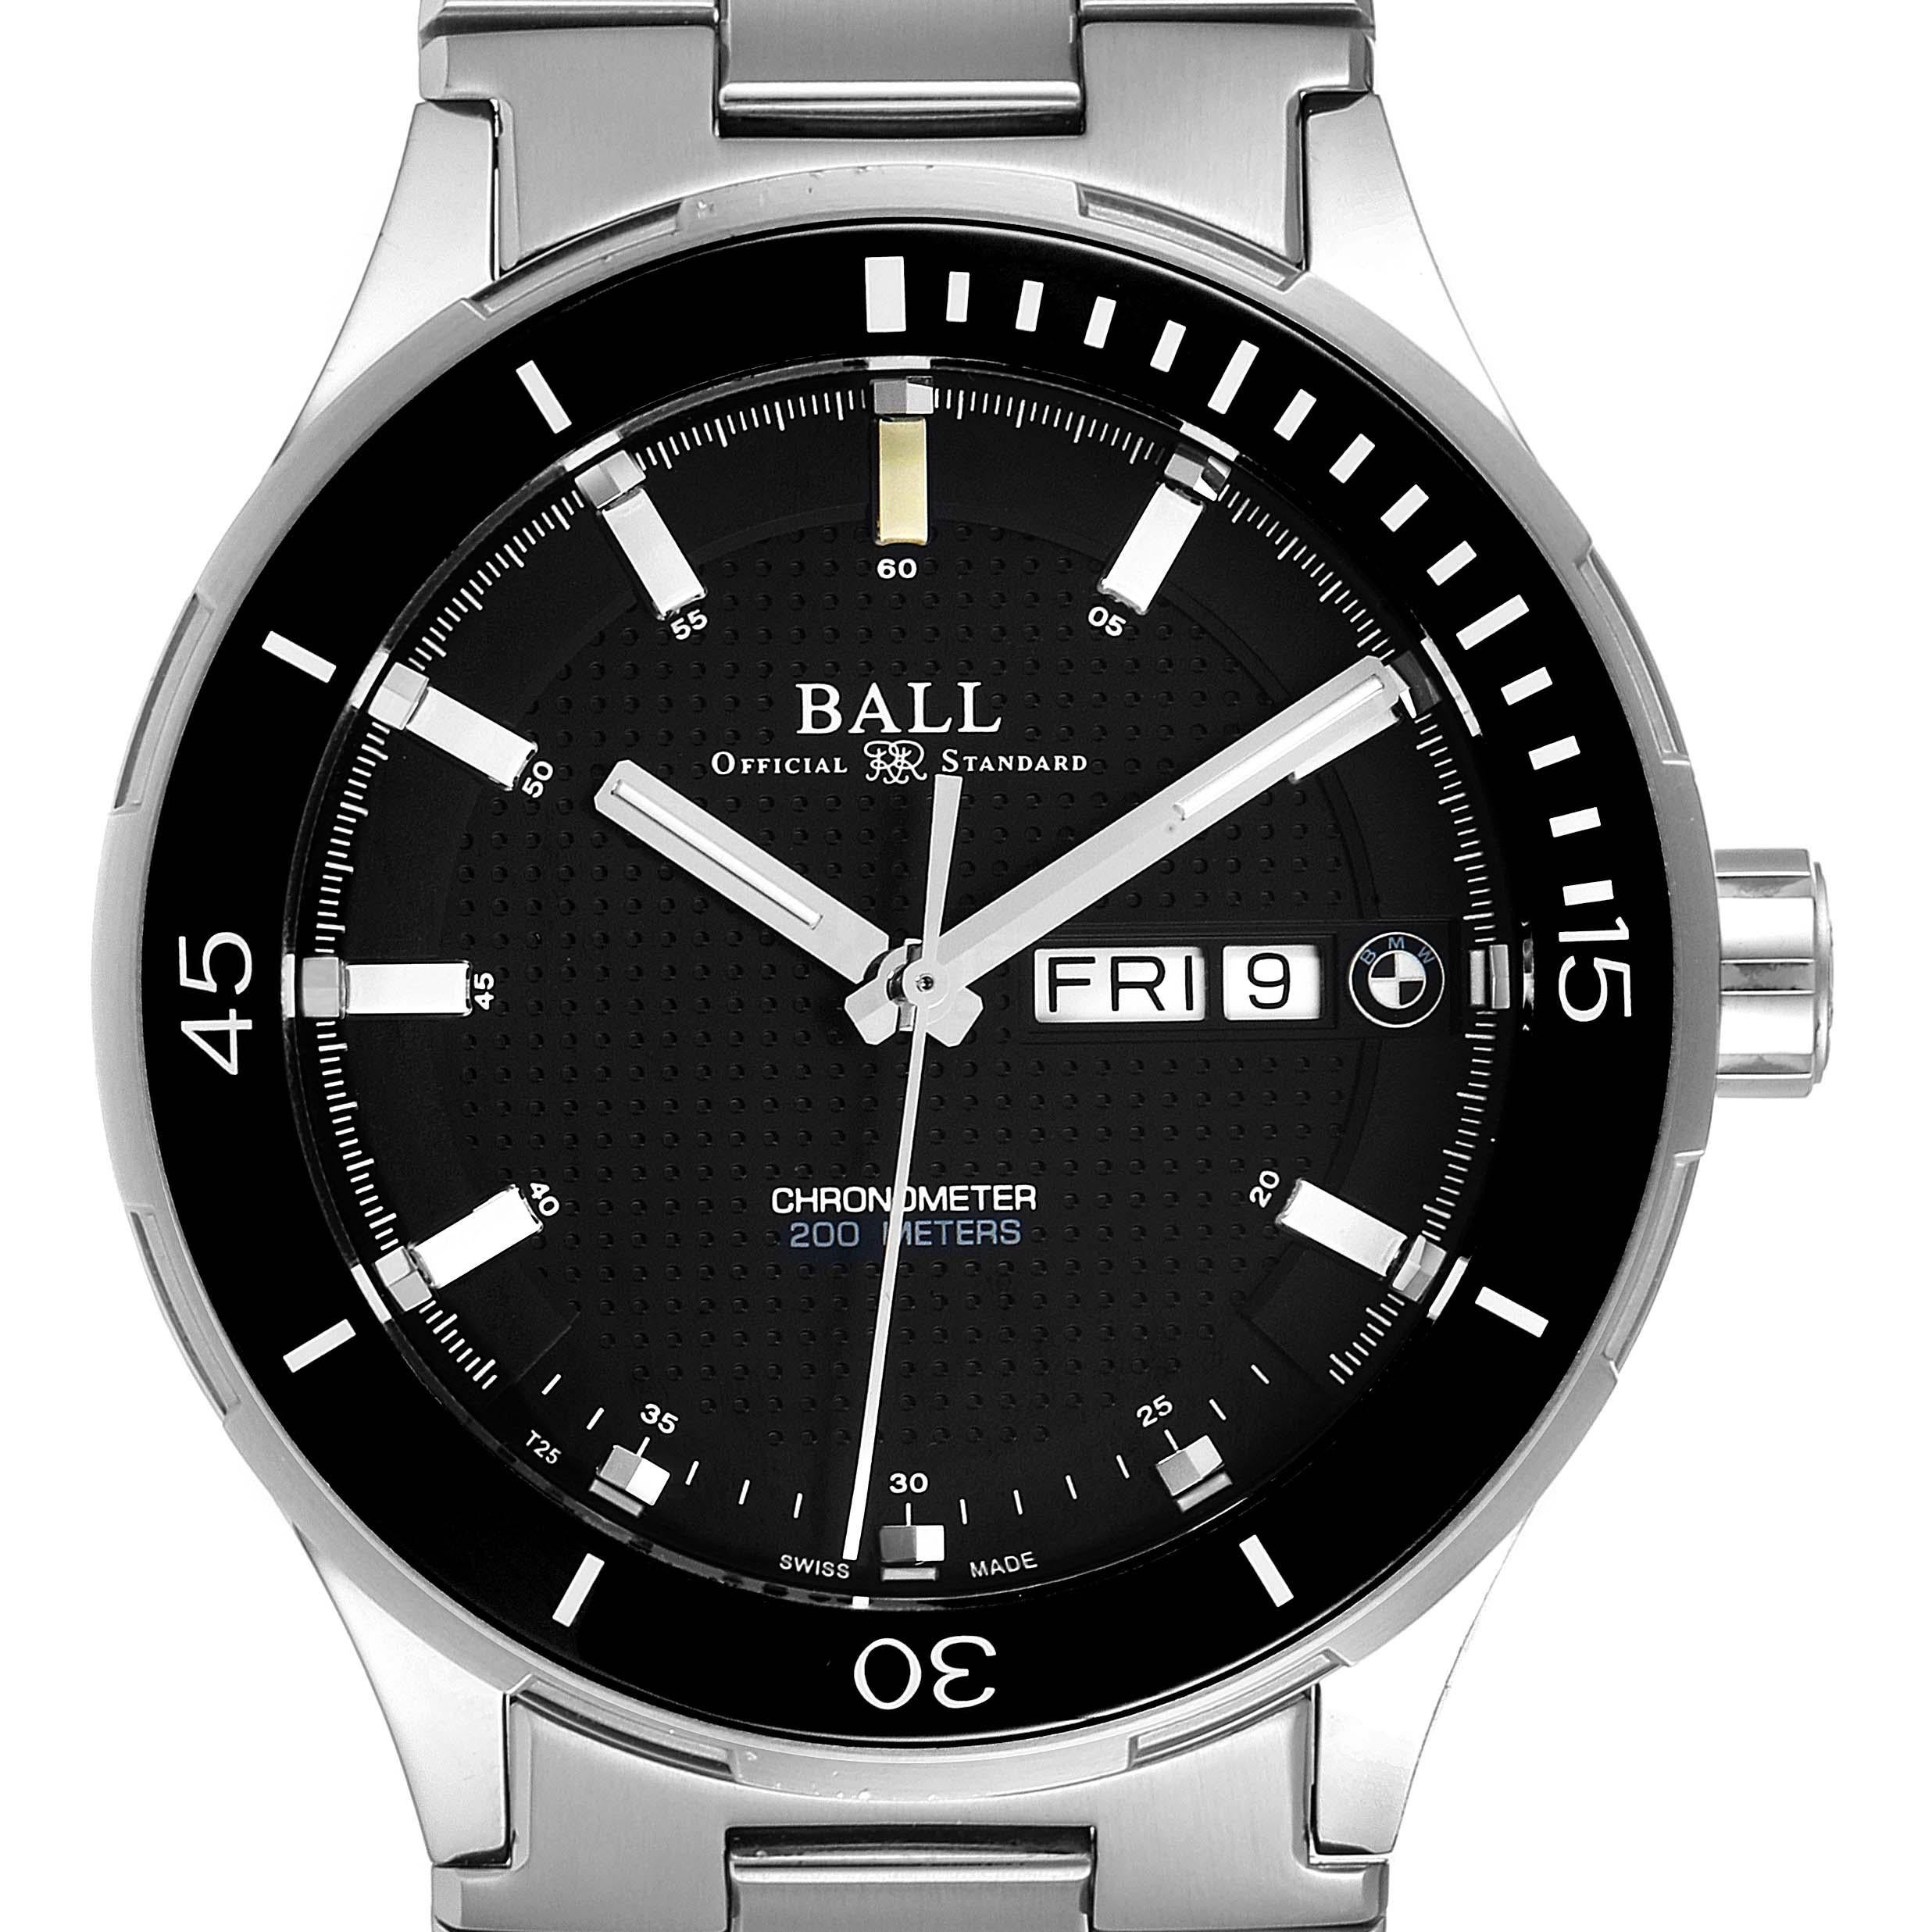 Ball Roadmaster BMW Timetrekker Black Dial Steel Mens Watch DM3010B. Automatic self-winding movement. Officially certified Swiss chronometer (COSC). Stainless steel case 44.0 mm in diameter.Transparent exhibition sapphire crystal case back. BMW logo